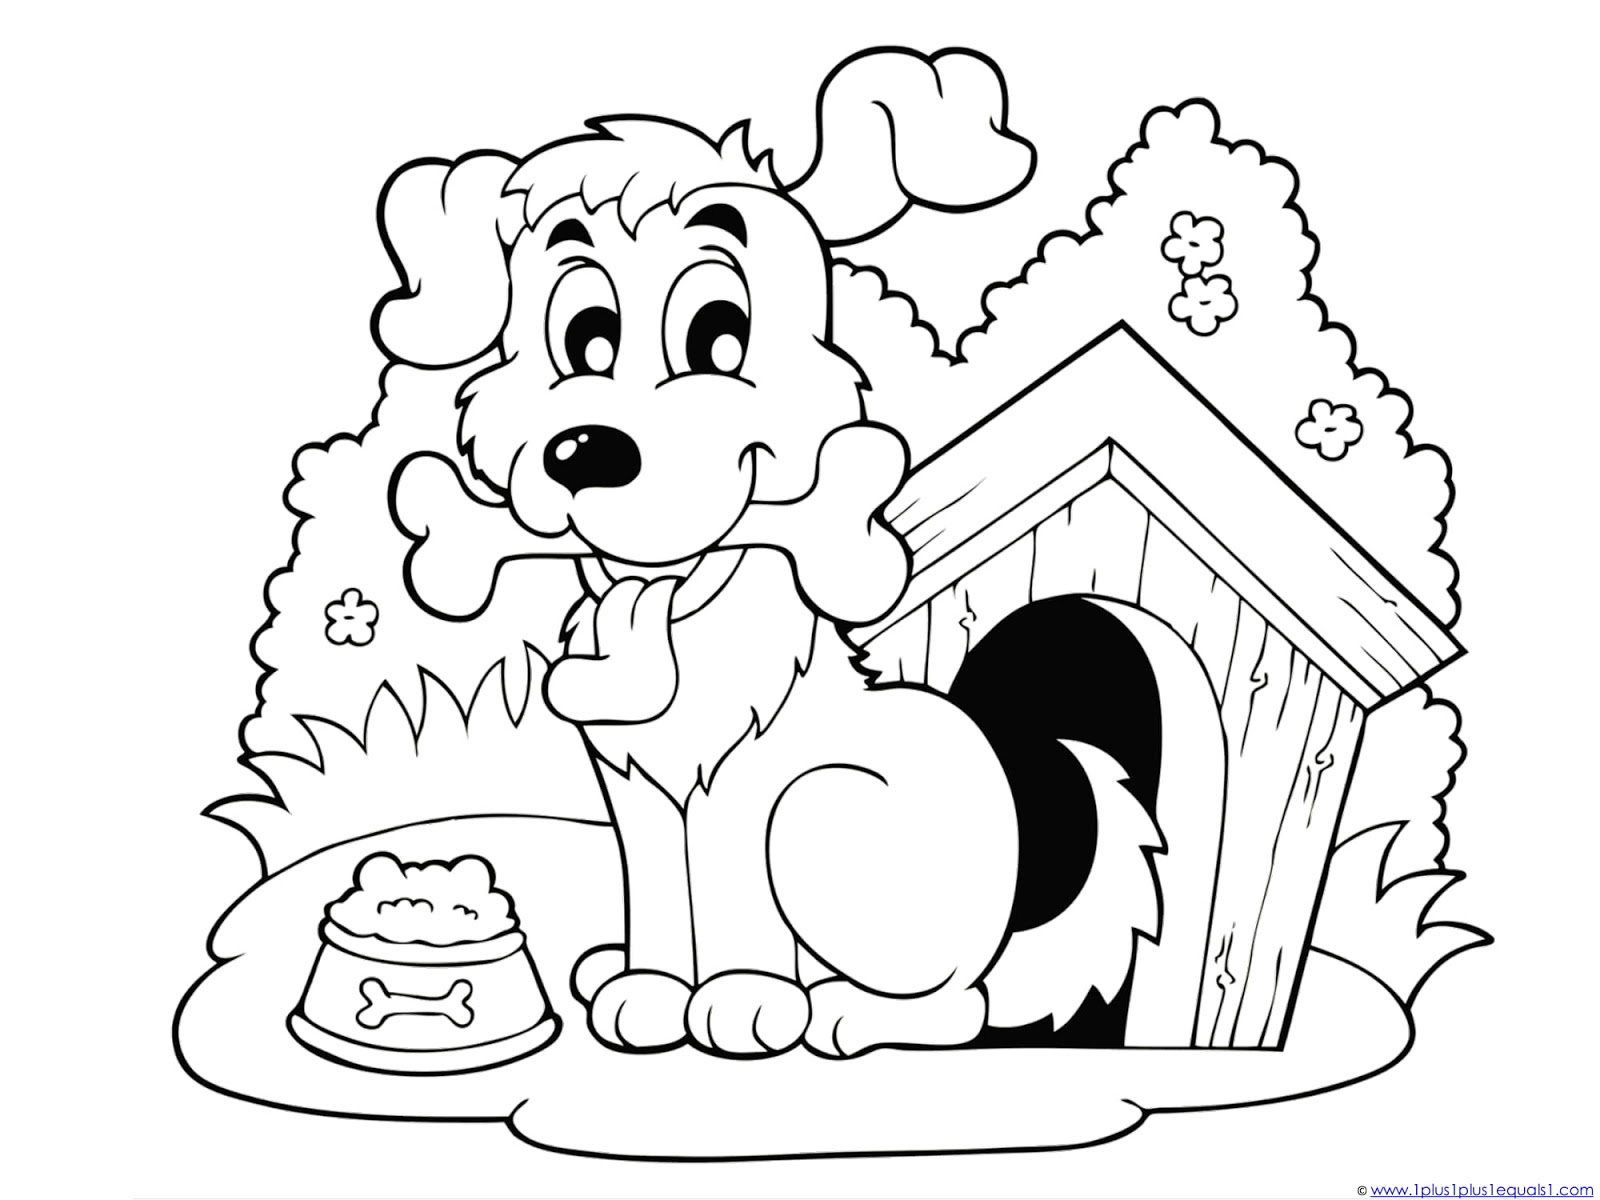 Coloring Pages Dog and Cats for Preschool - Malvorlage